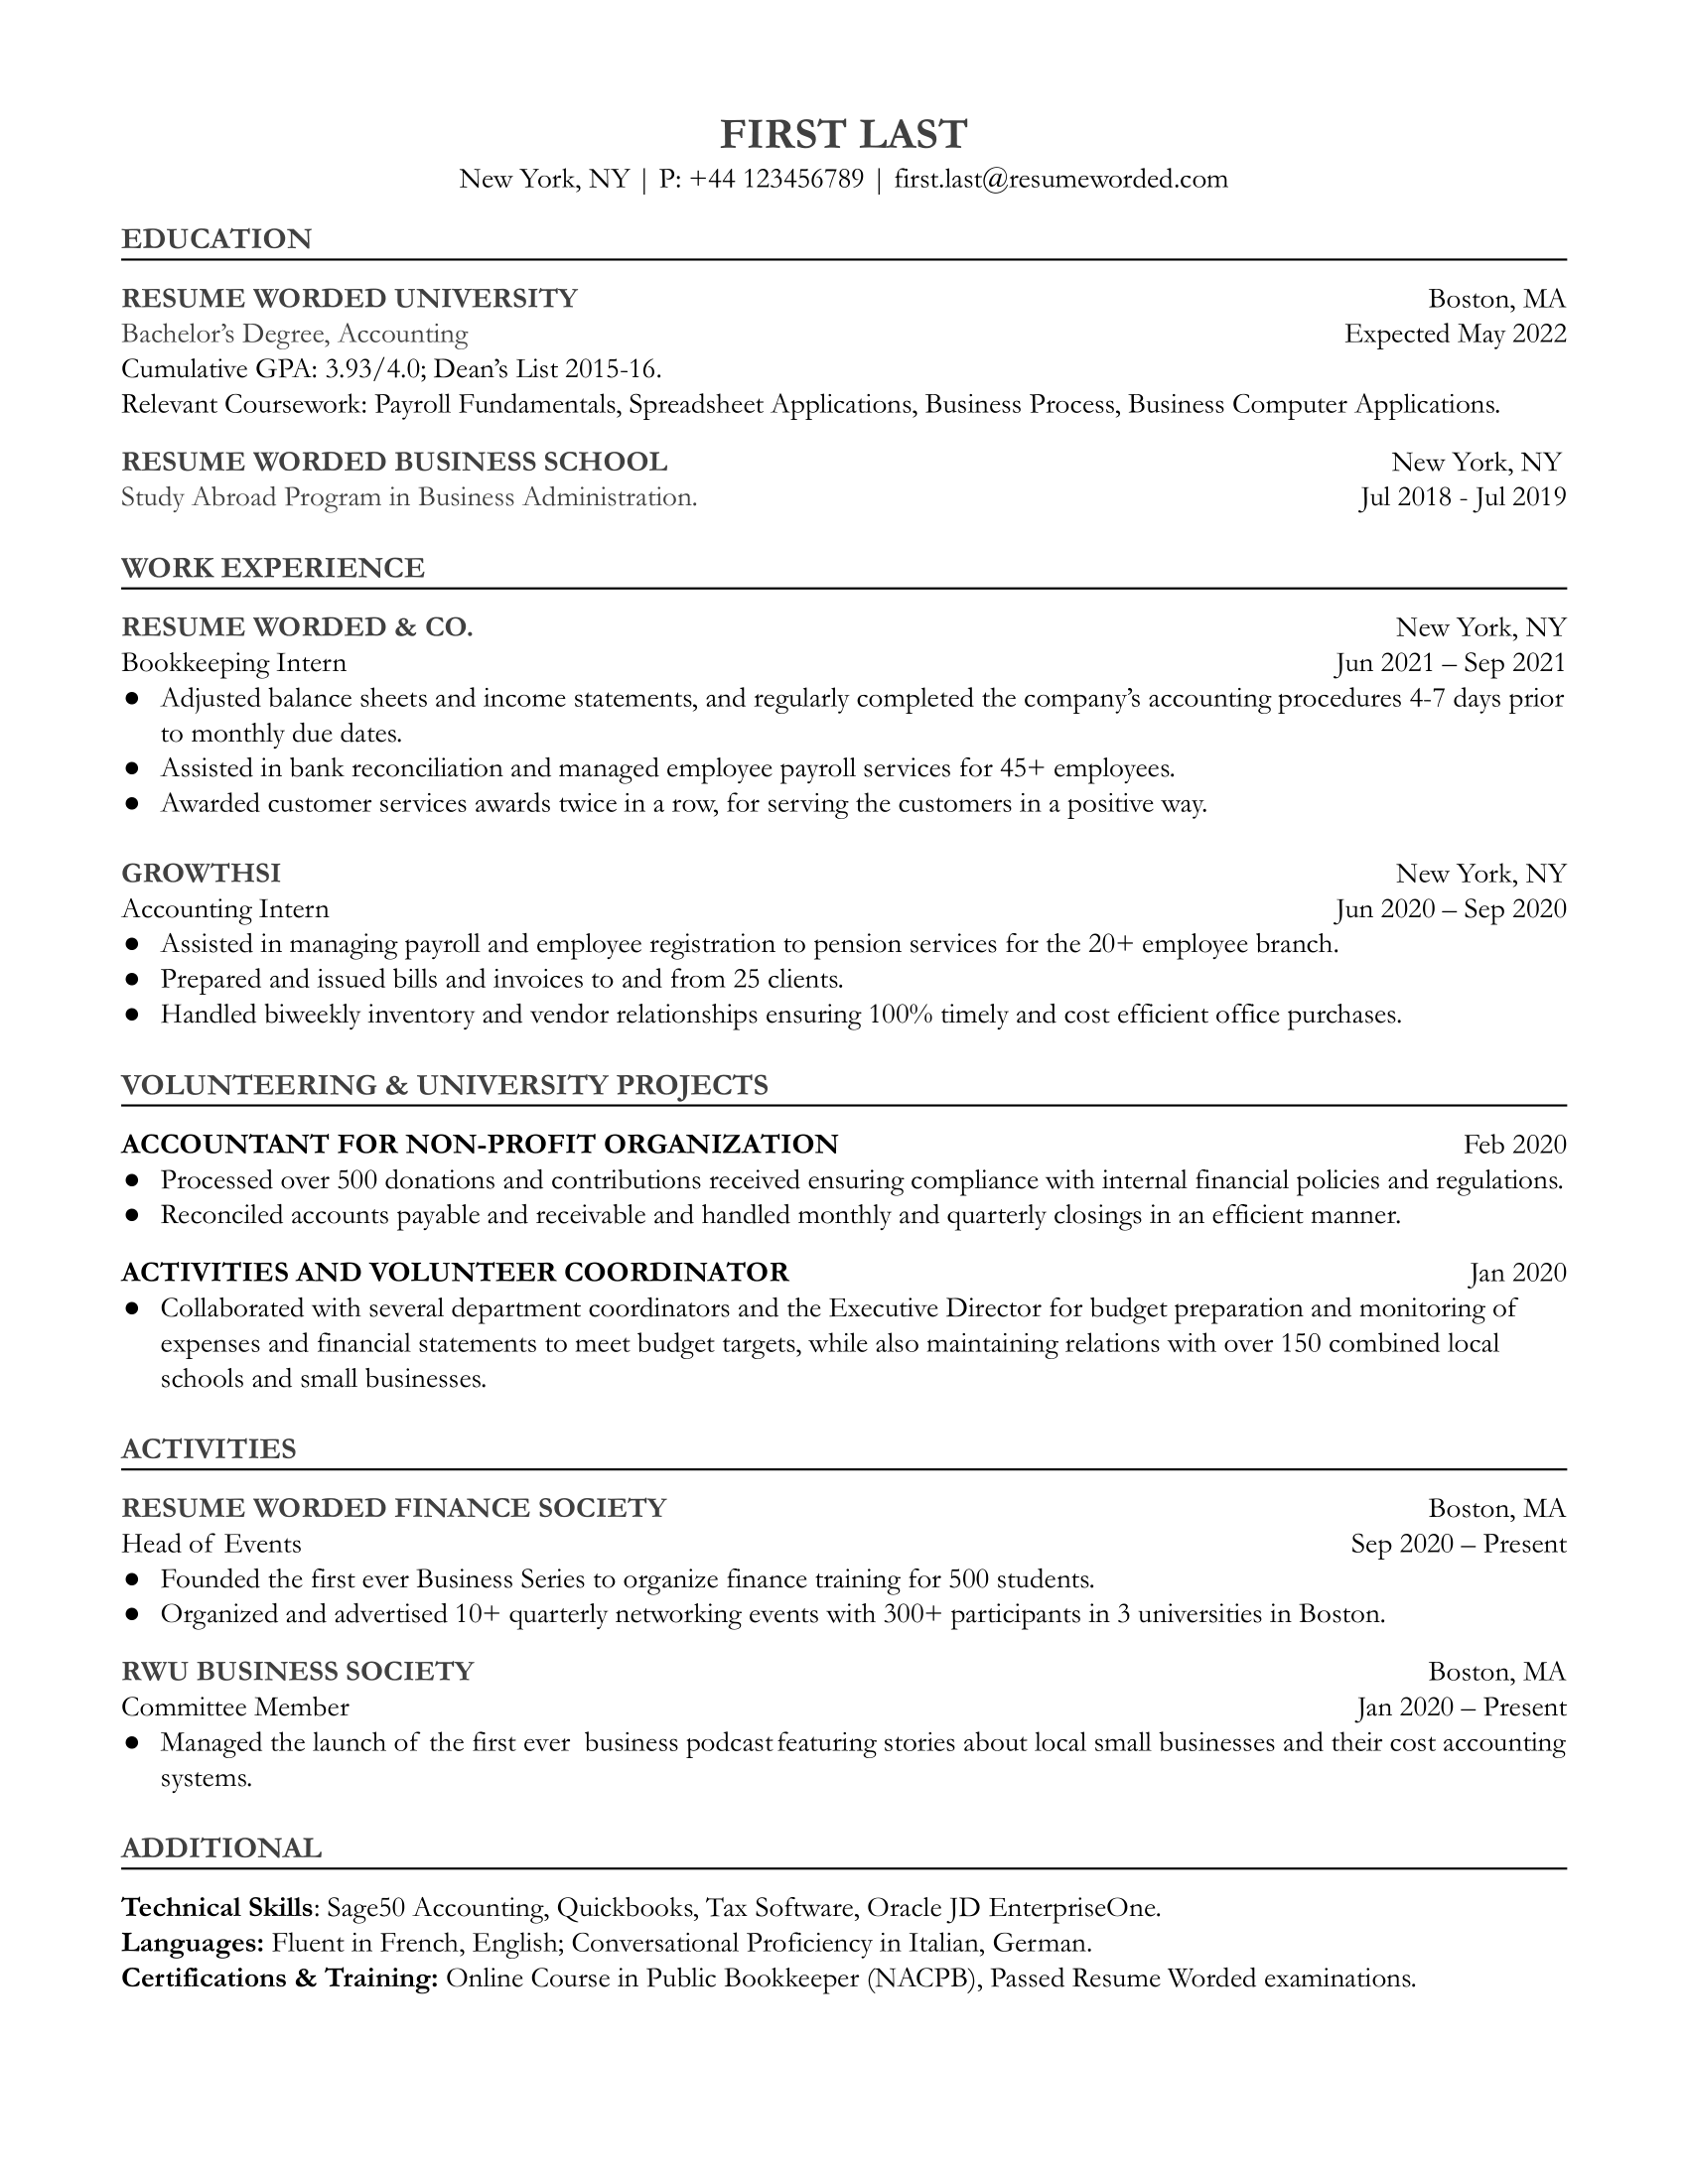 A CV for an entry-level bookkeeper displaying relevant financial software skills and attention to detail.